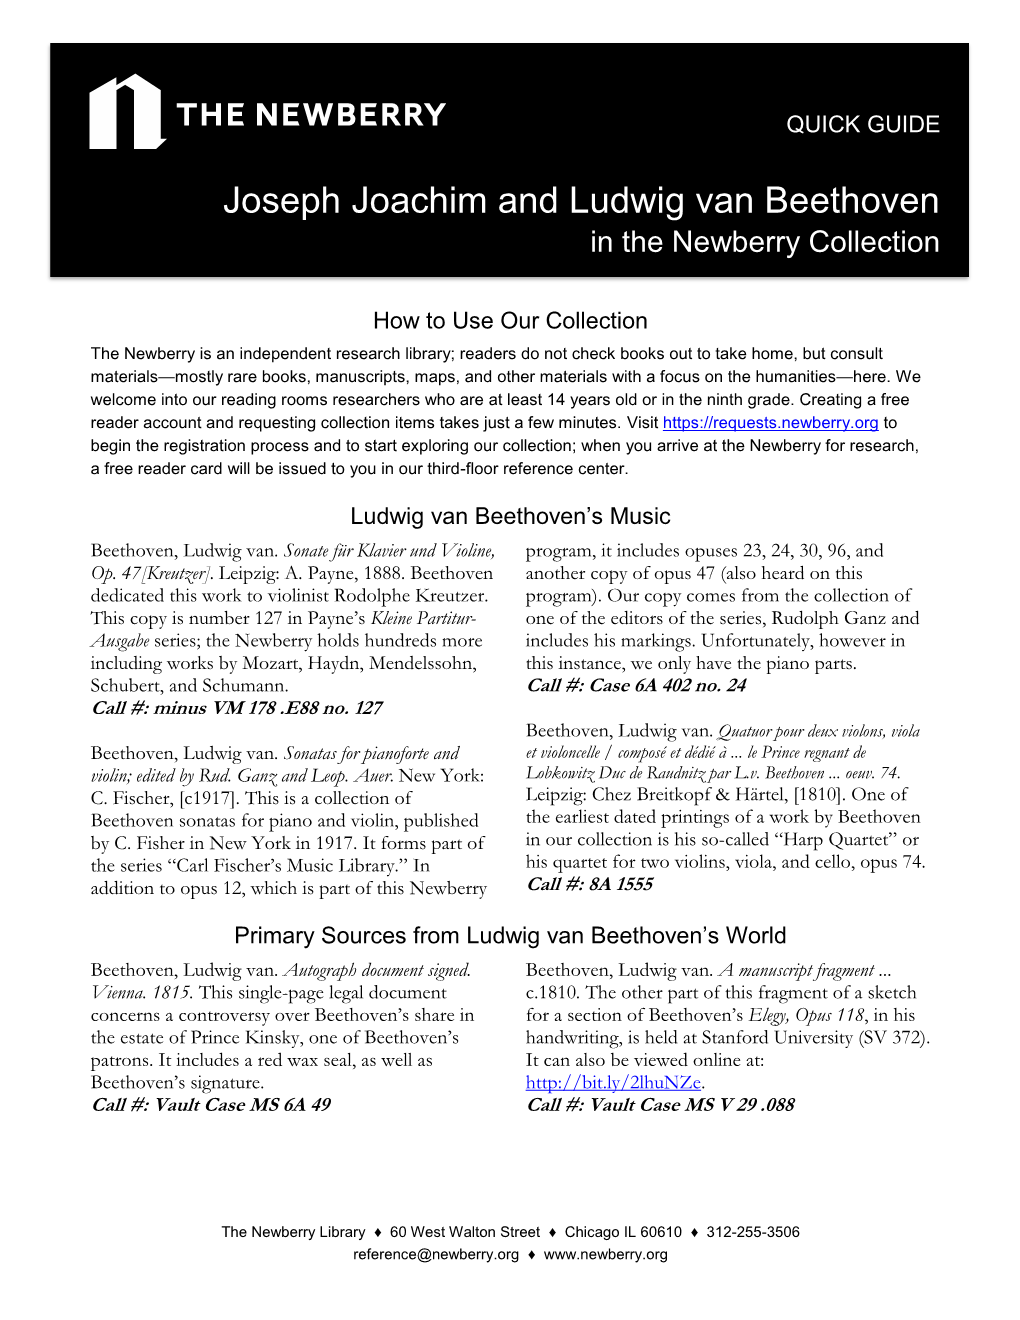 Joseph Joachim and Ludwig Van Beethoven in the Newberry Collection